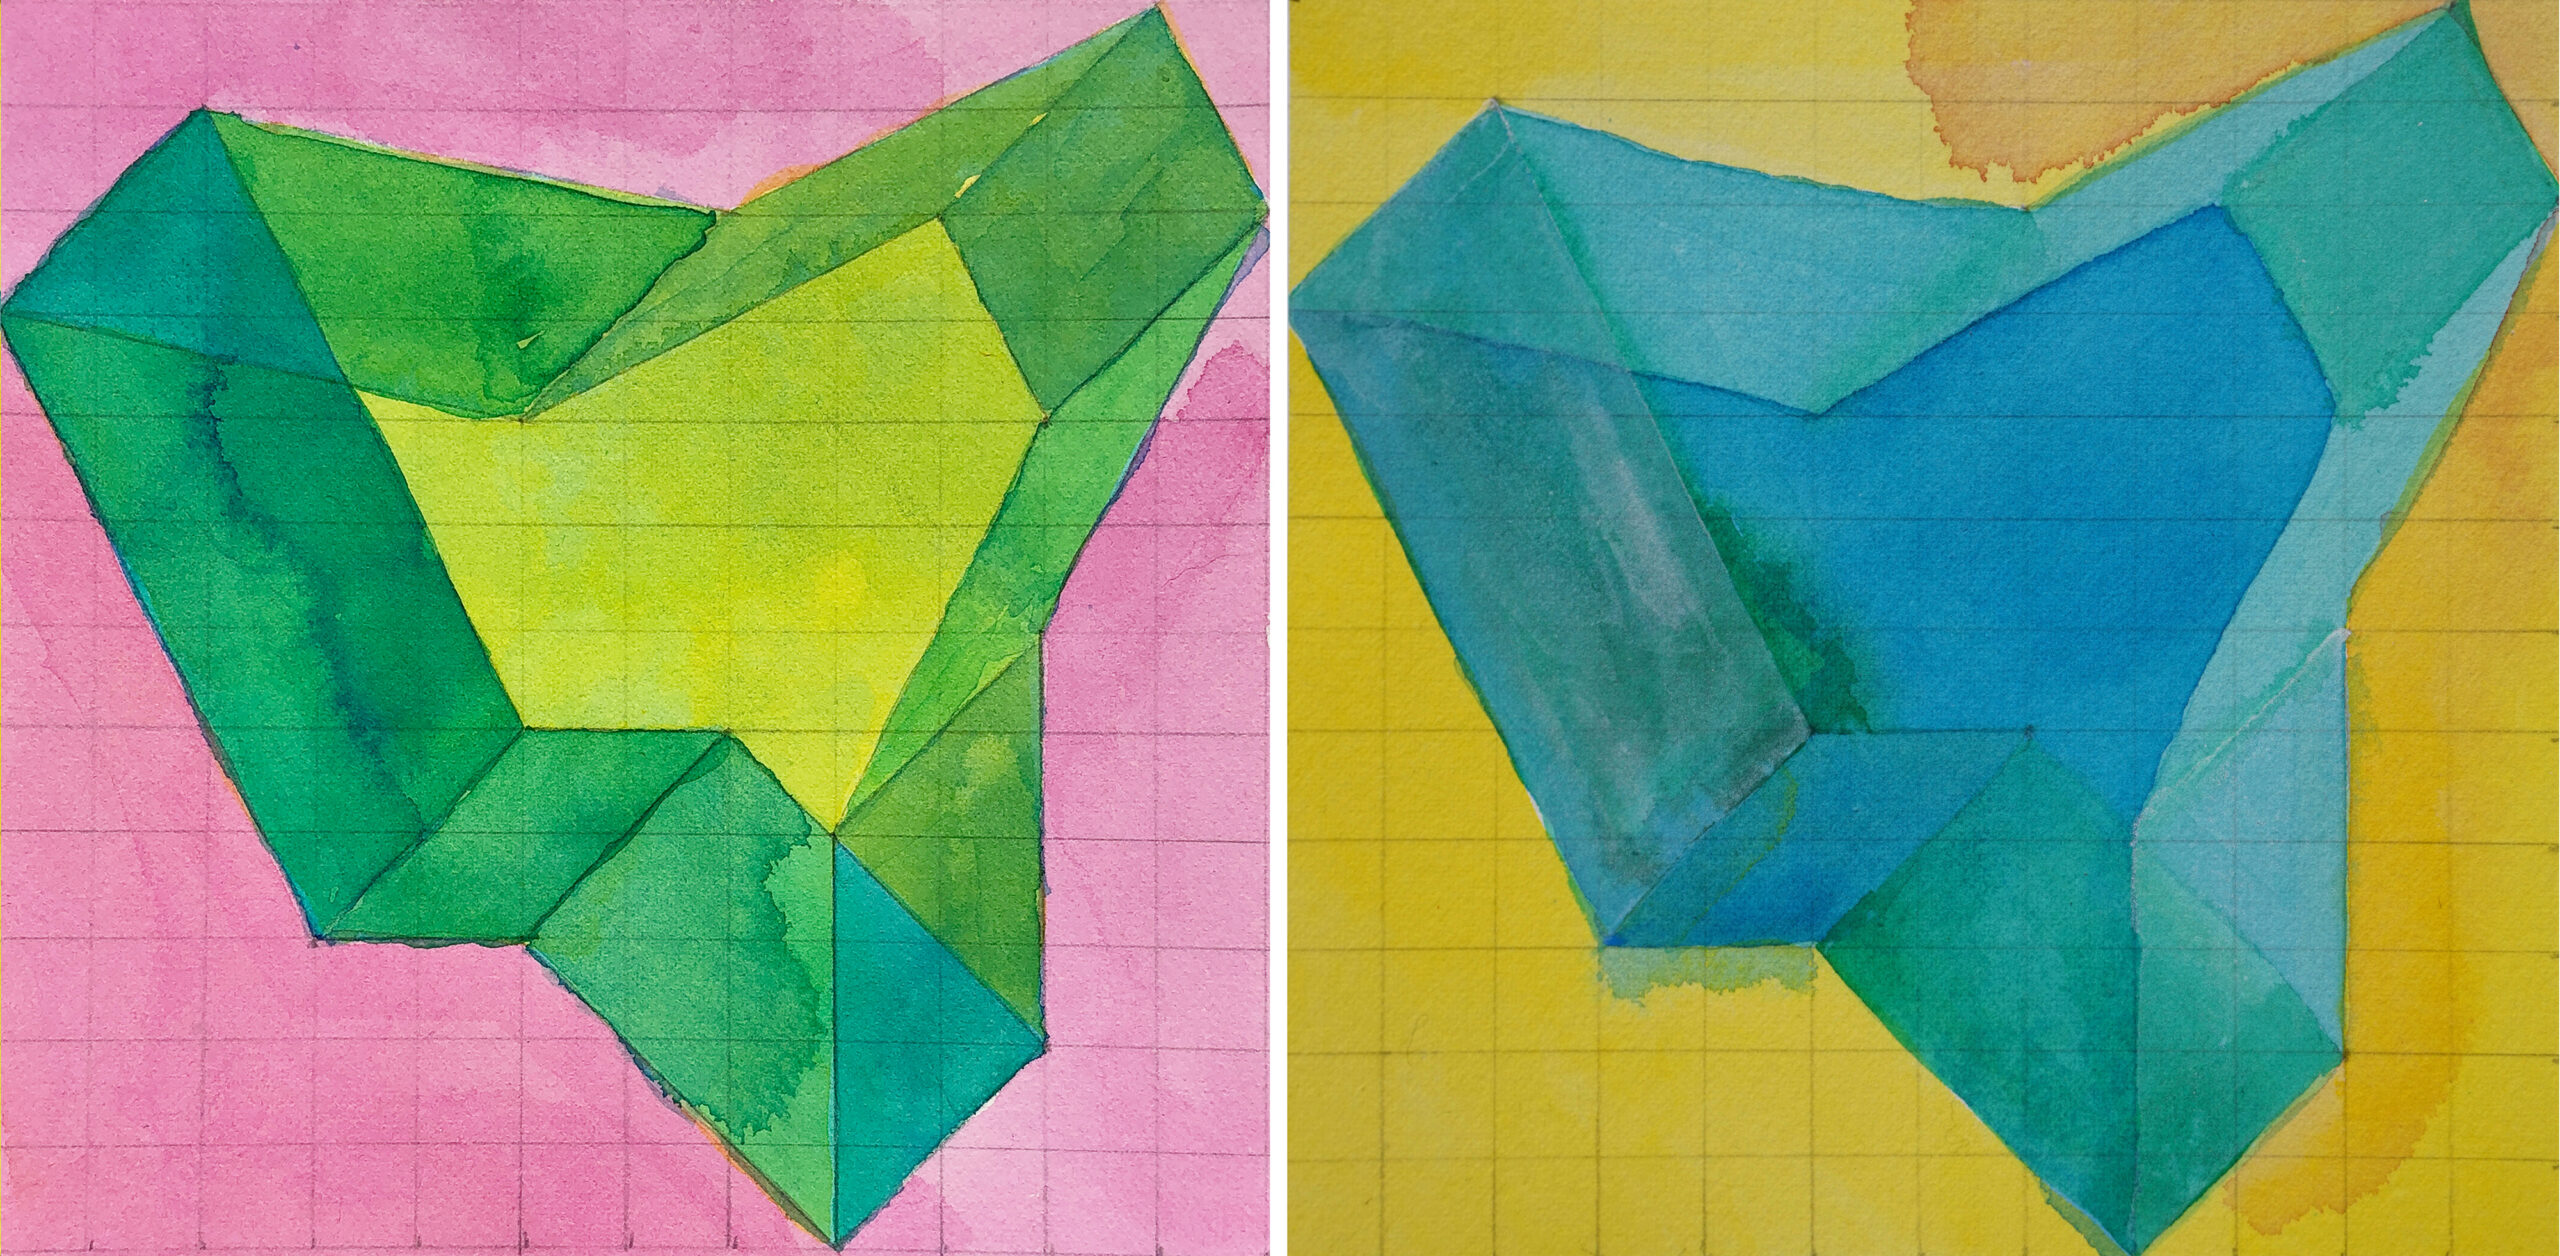 The angular planes begin to enclose a space like strips of paper folded to make a concave polygon. Wish still has hope, with its greens and pinks; Worry is mostly worried, with blues that fade into each other, in a field that’s yellow yet somber.